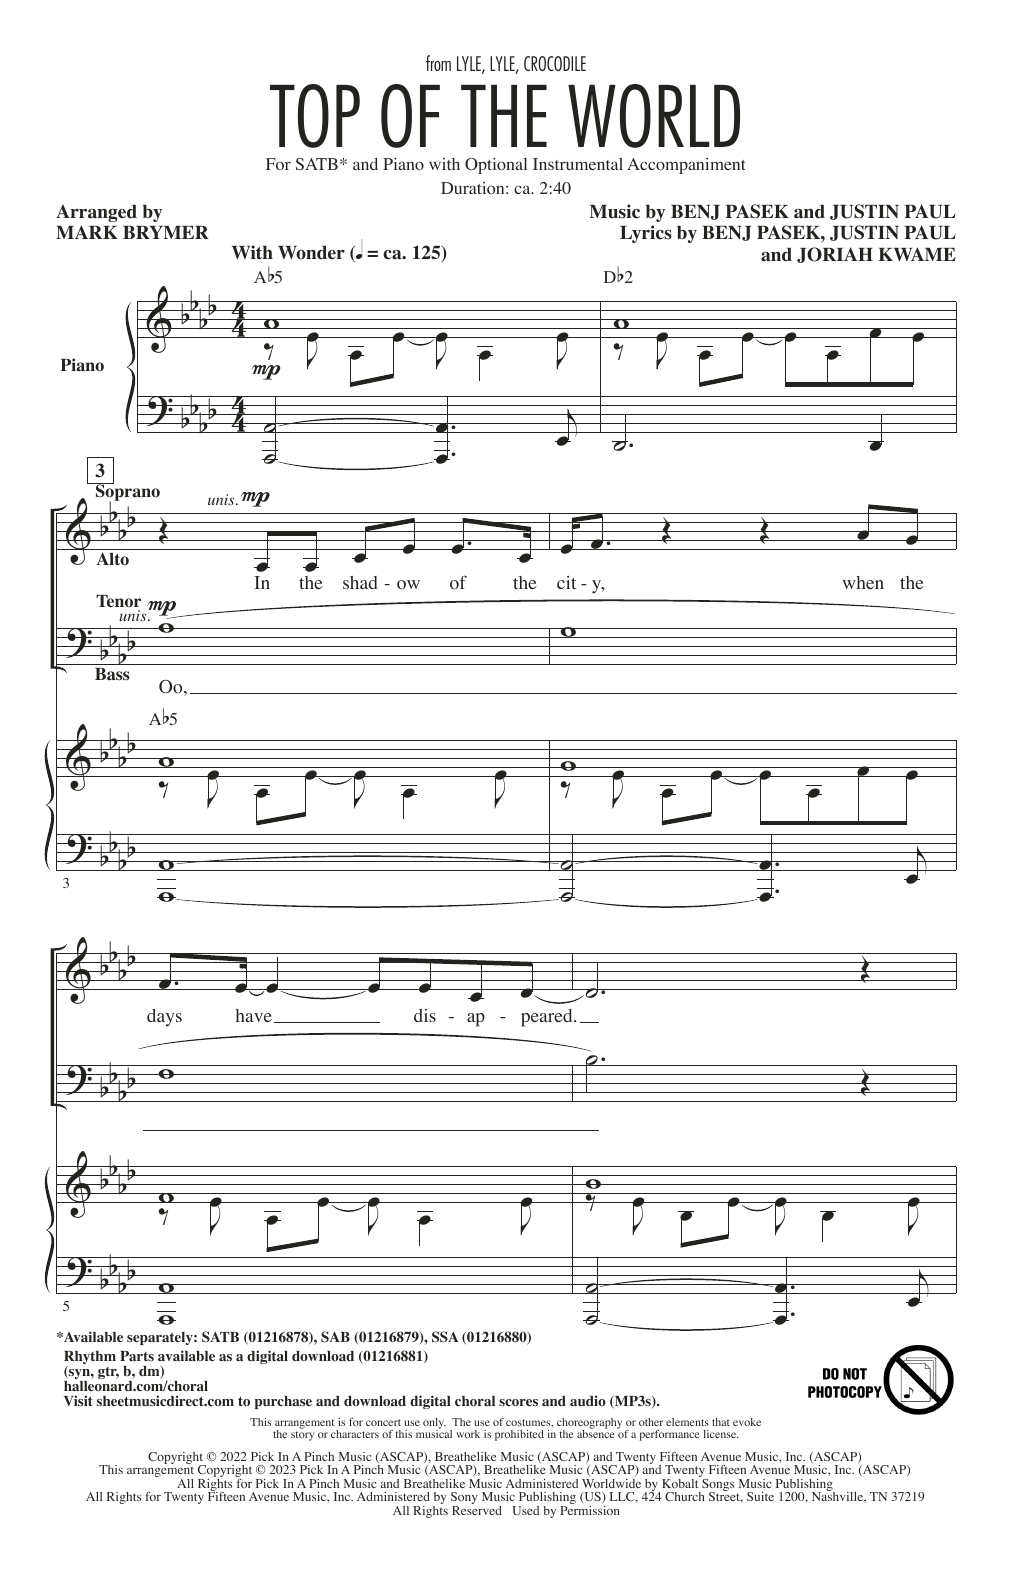 Download Shawn Mendes Top Of The World (from Lyle, Lyle, Croc Sheet Music